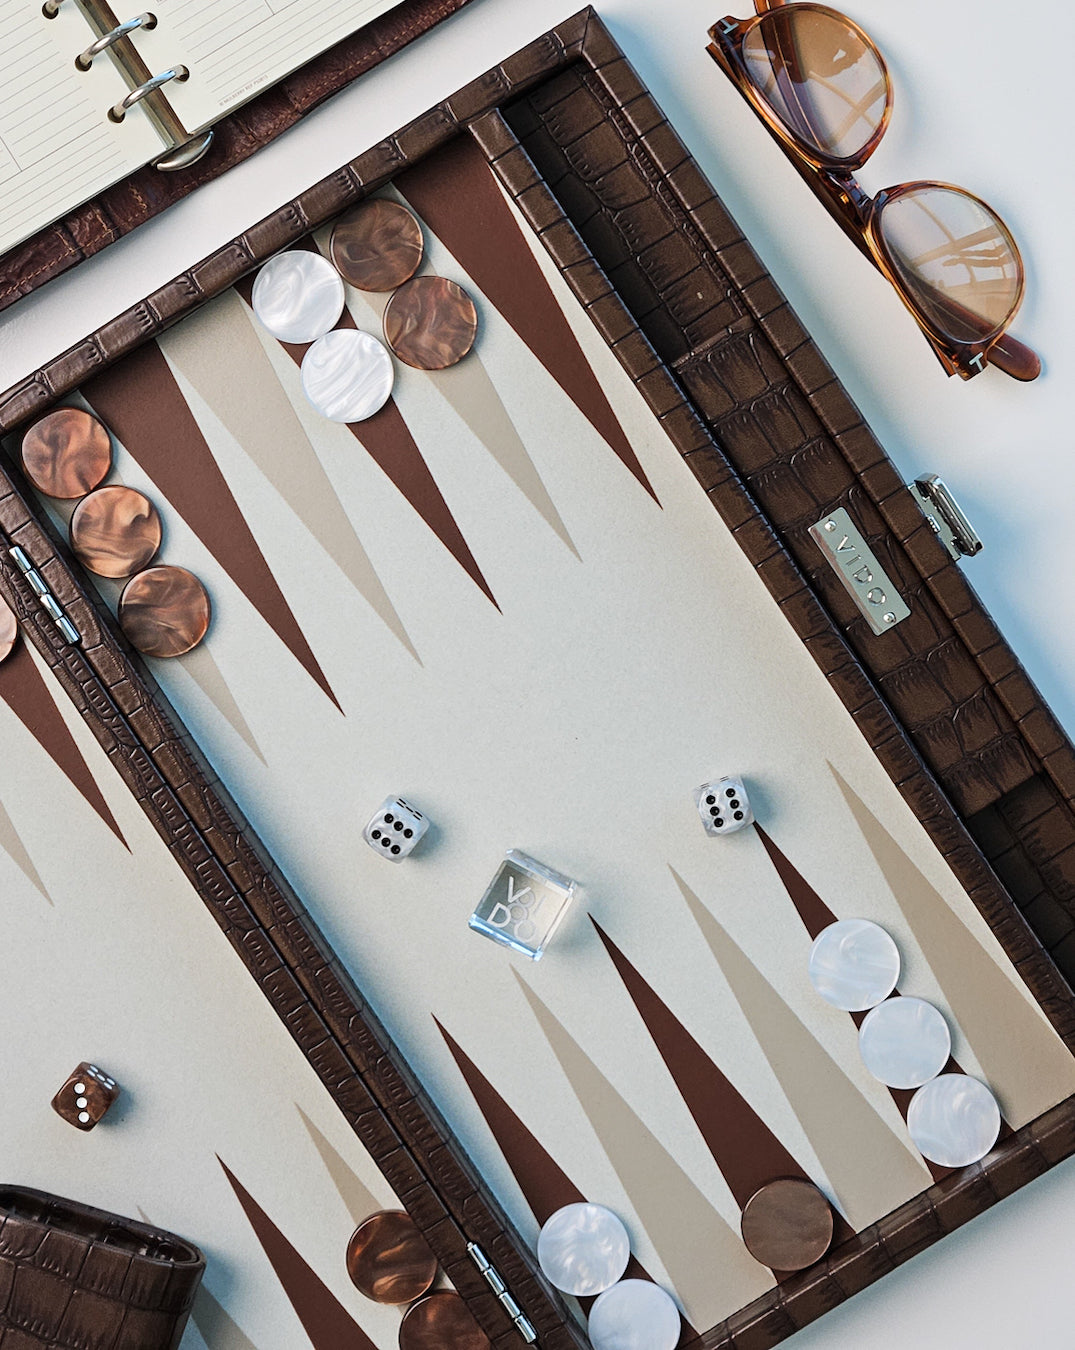 VIDO Patinated Brown Backgammon Set Handmade With High Quality Materials